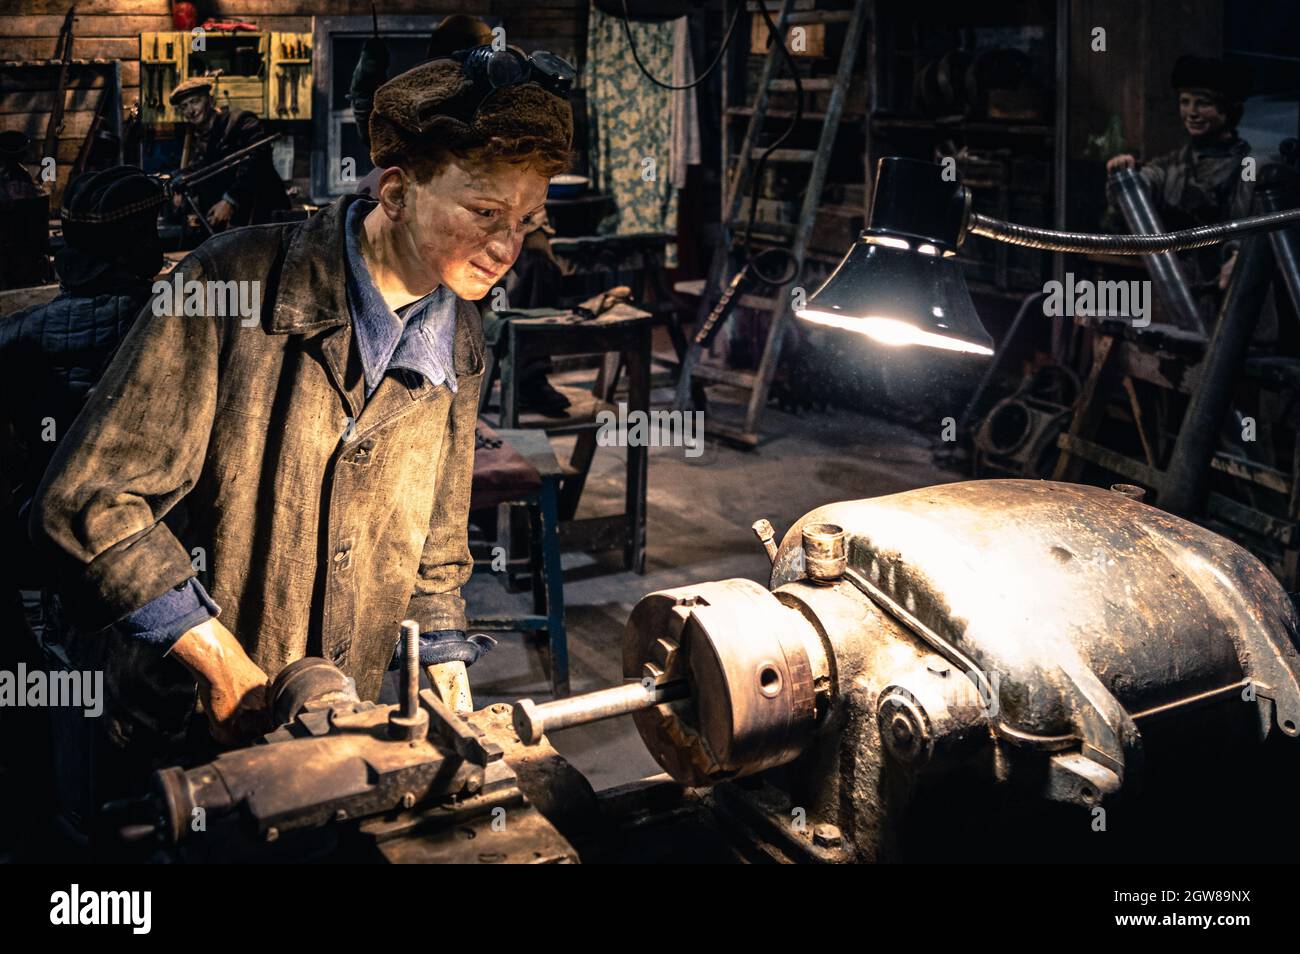 Young lad operating a lathe. WWII historical diorama titled 'Memory Speaks. A Way through the War'. Saint Petersburg. Stock Photo